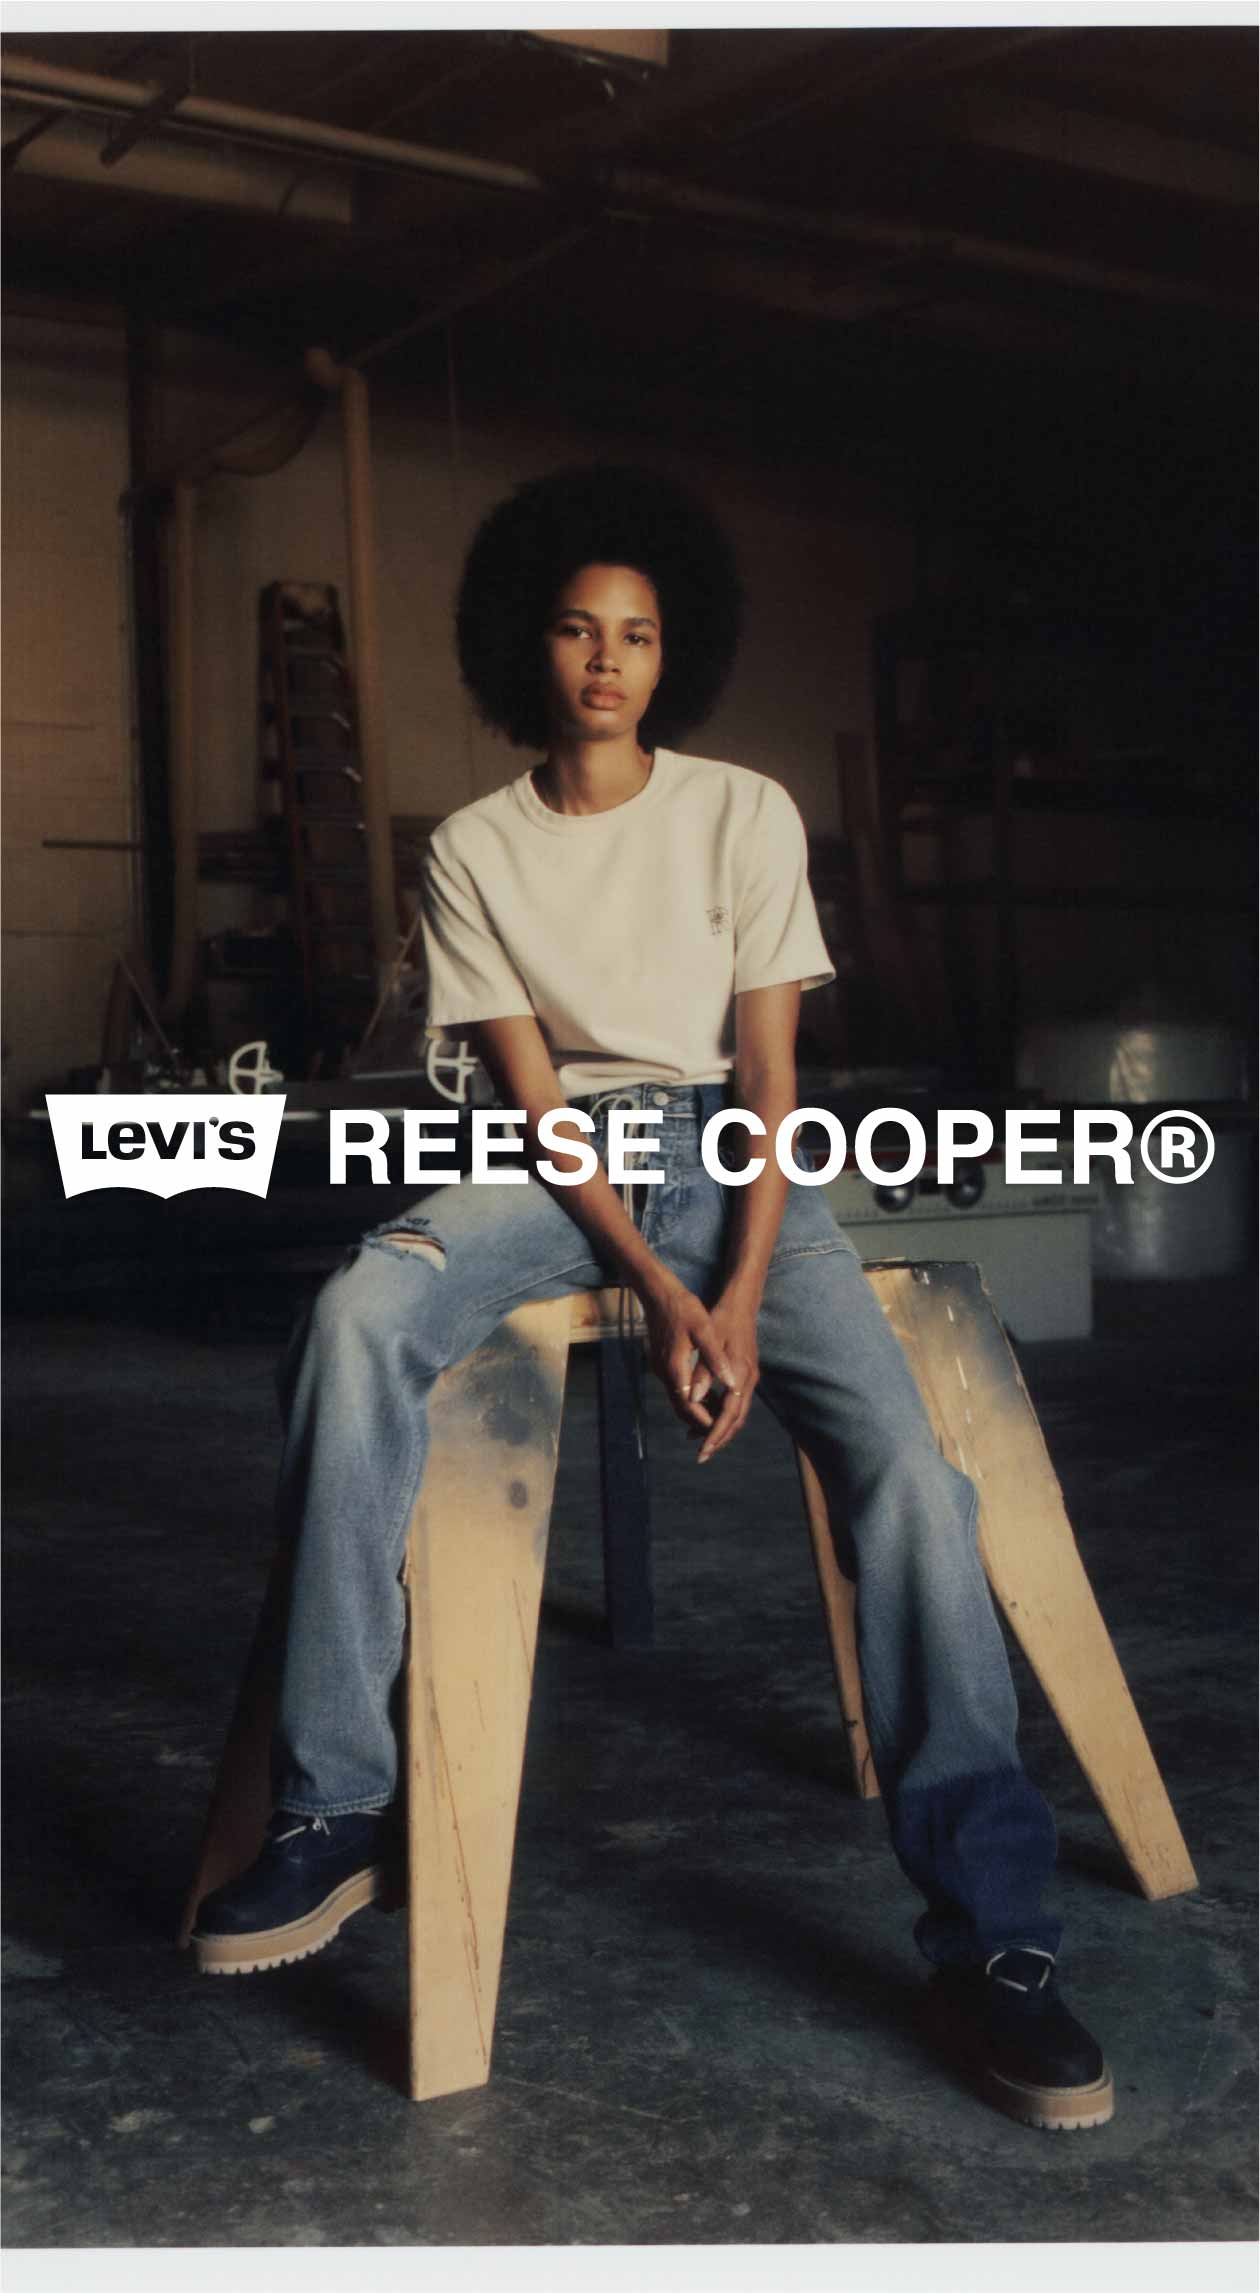 Reese Cooper x Levi's Collaboration